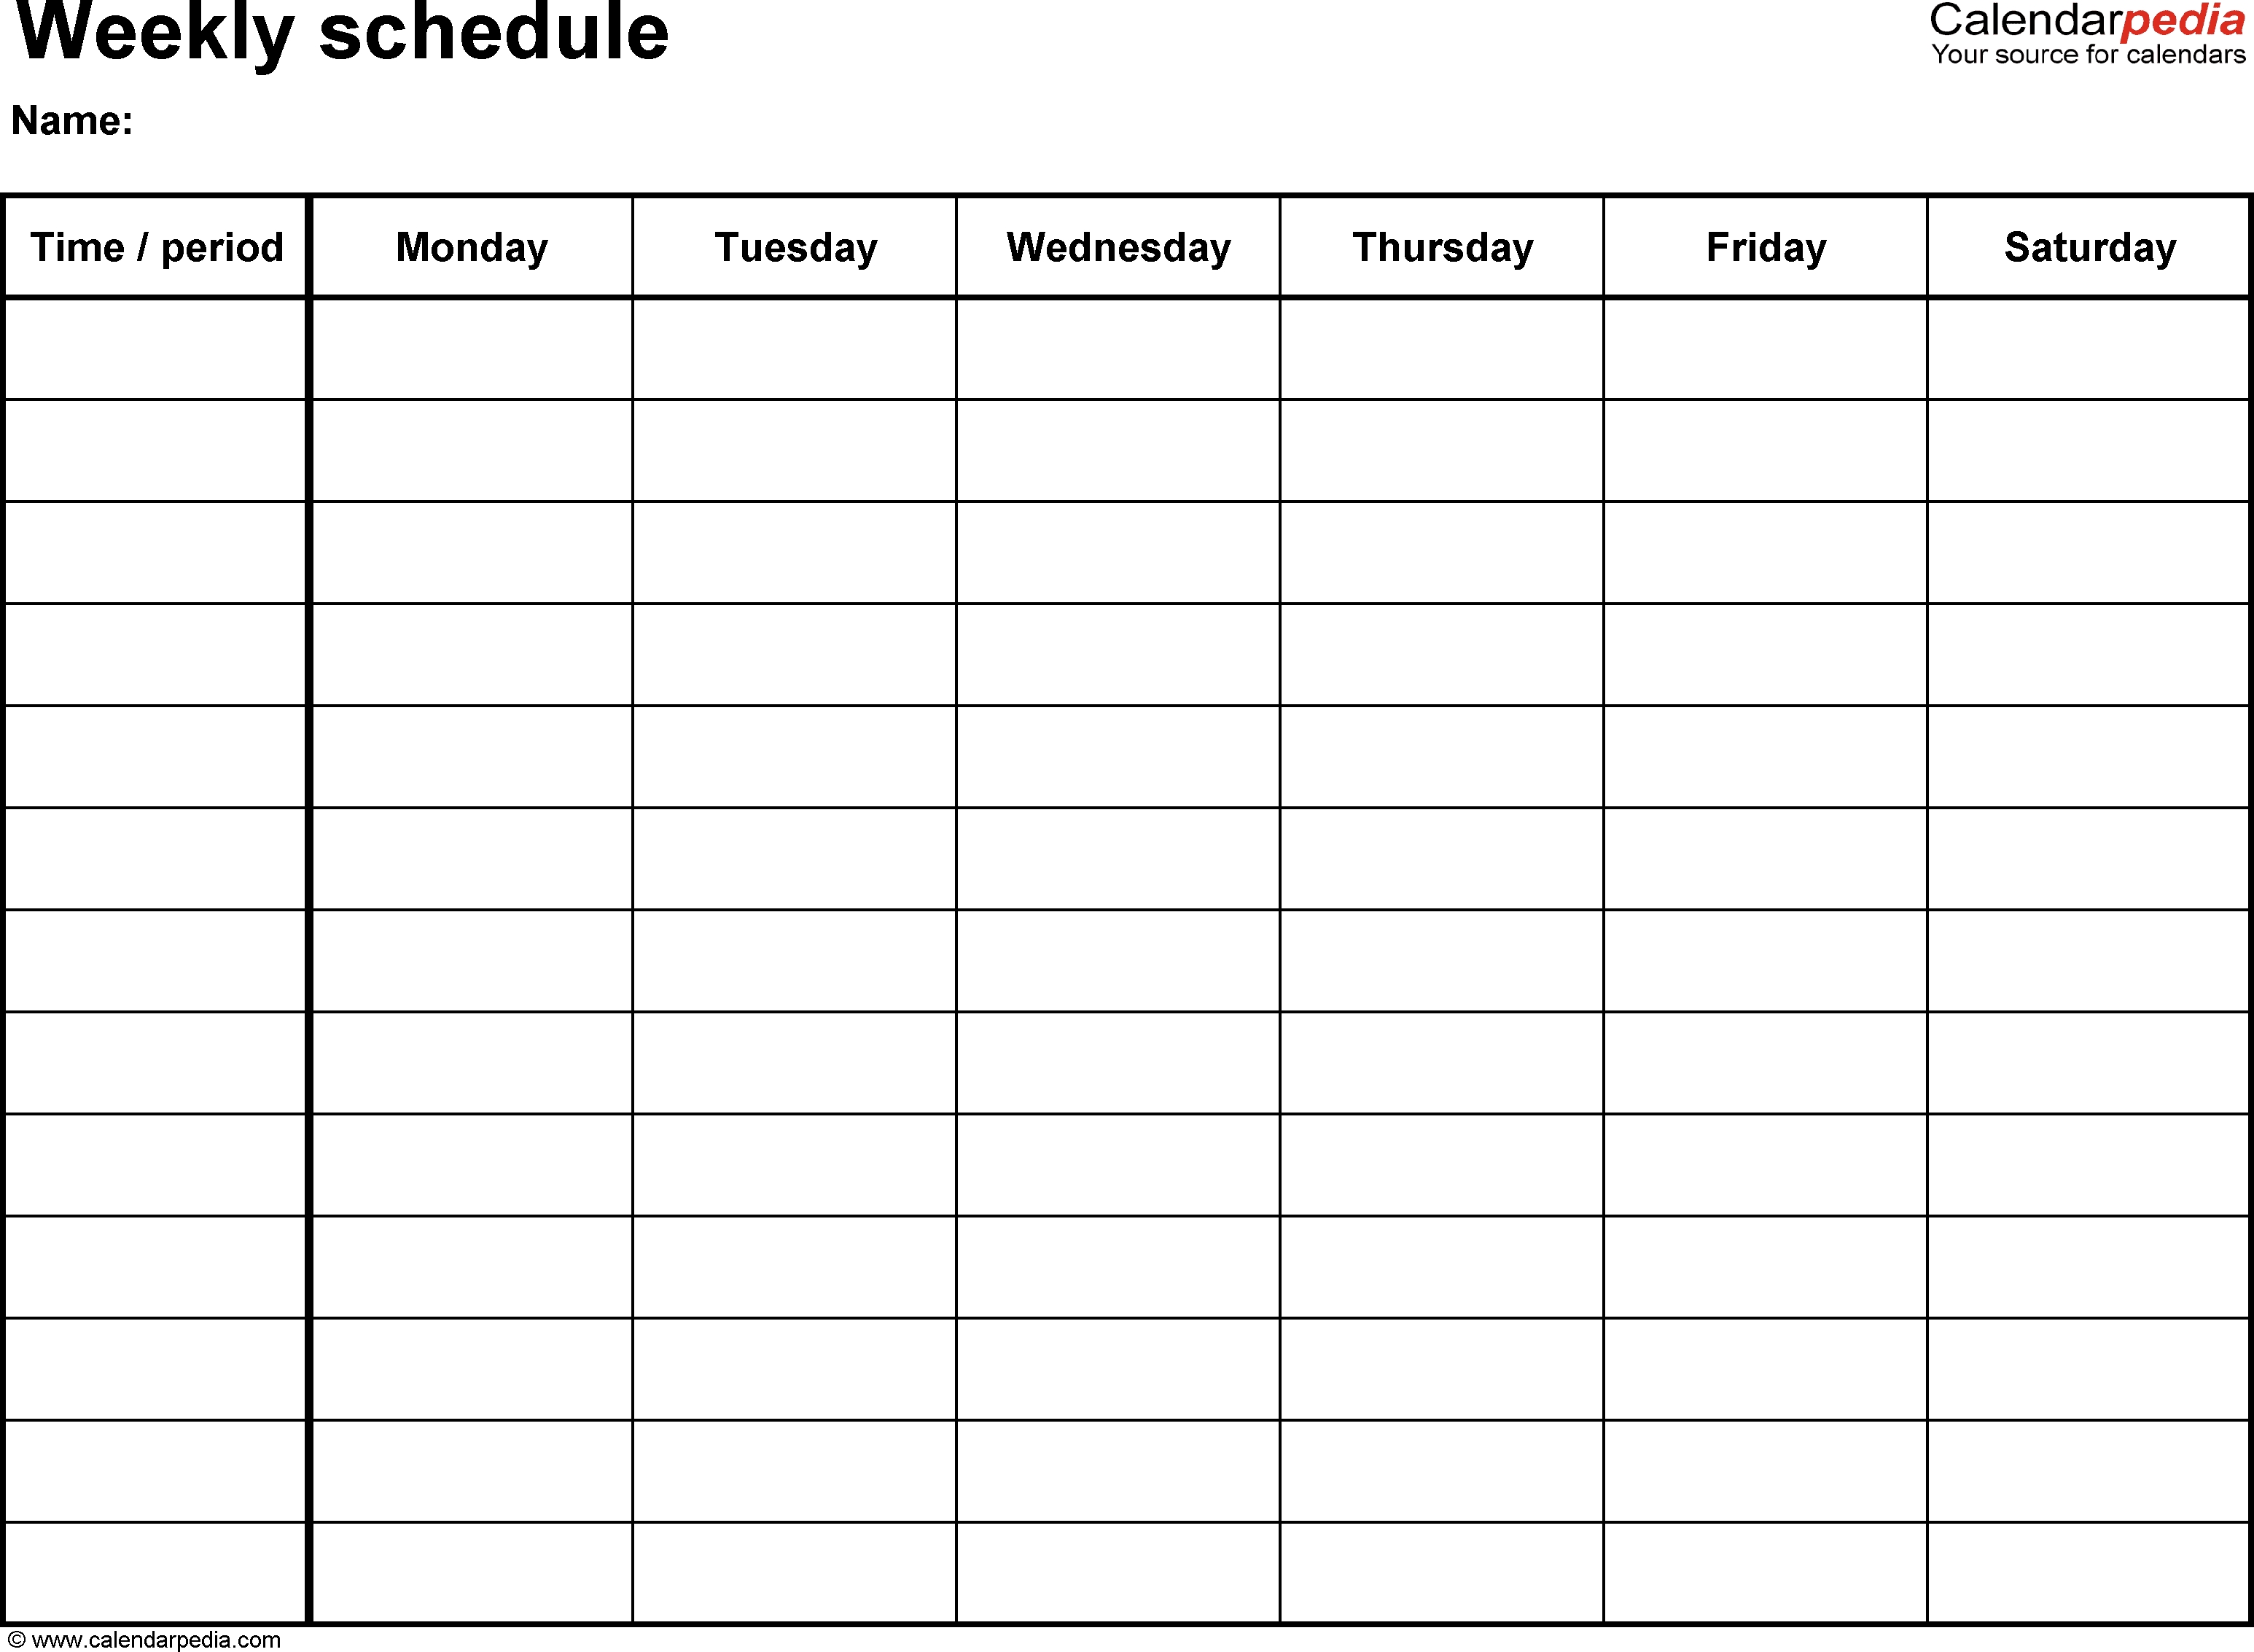 Free Weekly Schedule Templates For Excel - 18 Templates Exceptional Excel Calendar Template That Starts Week On Monday